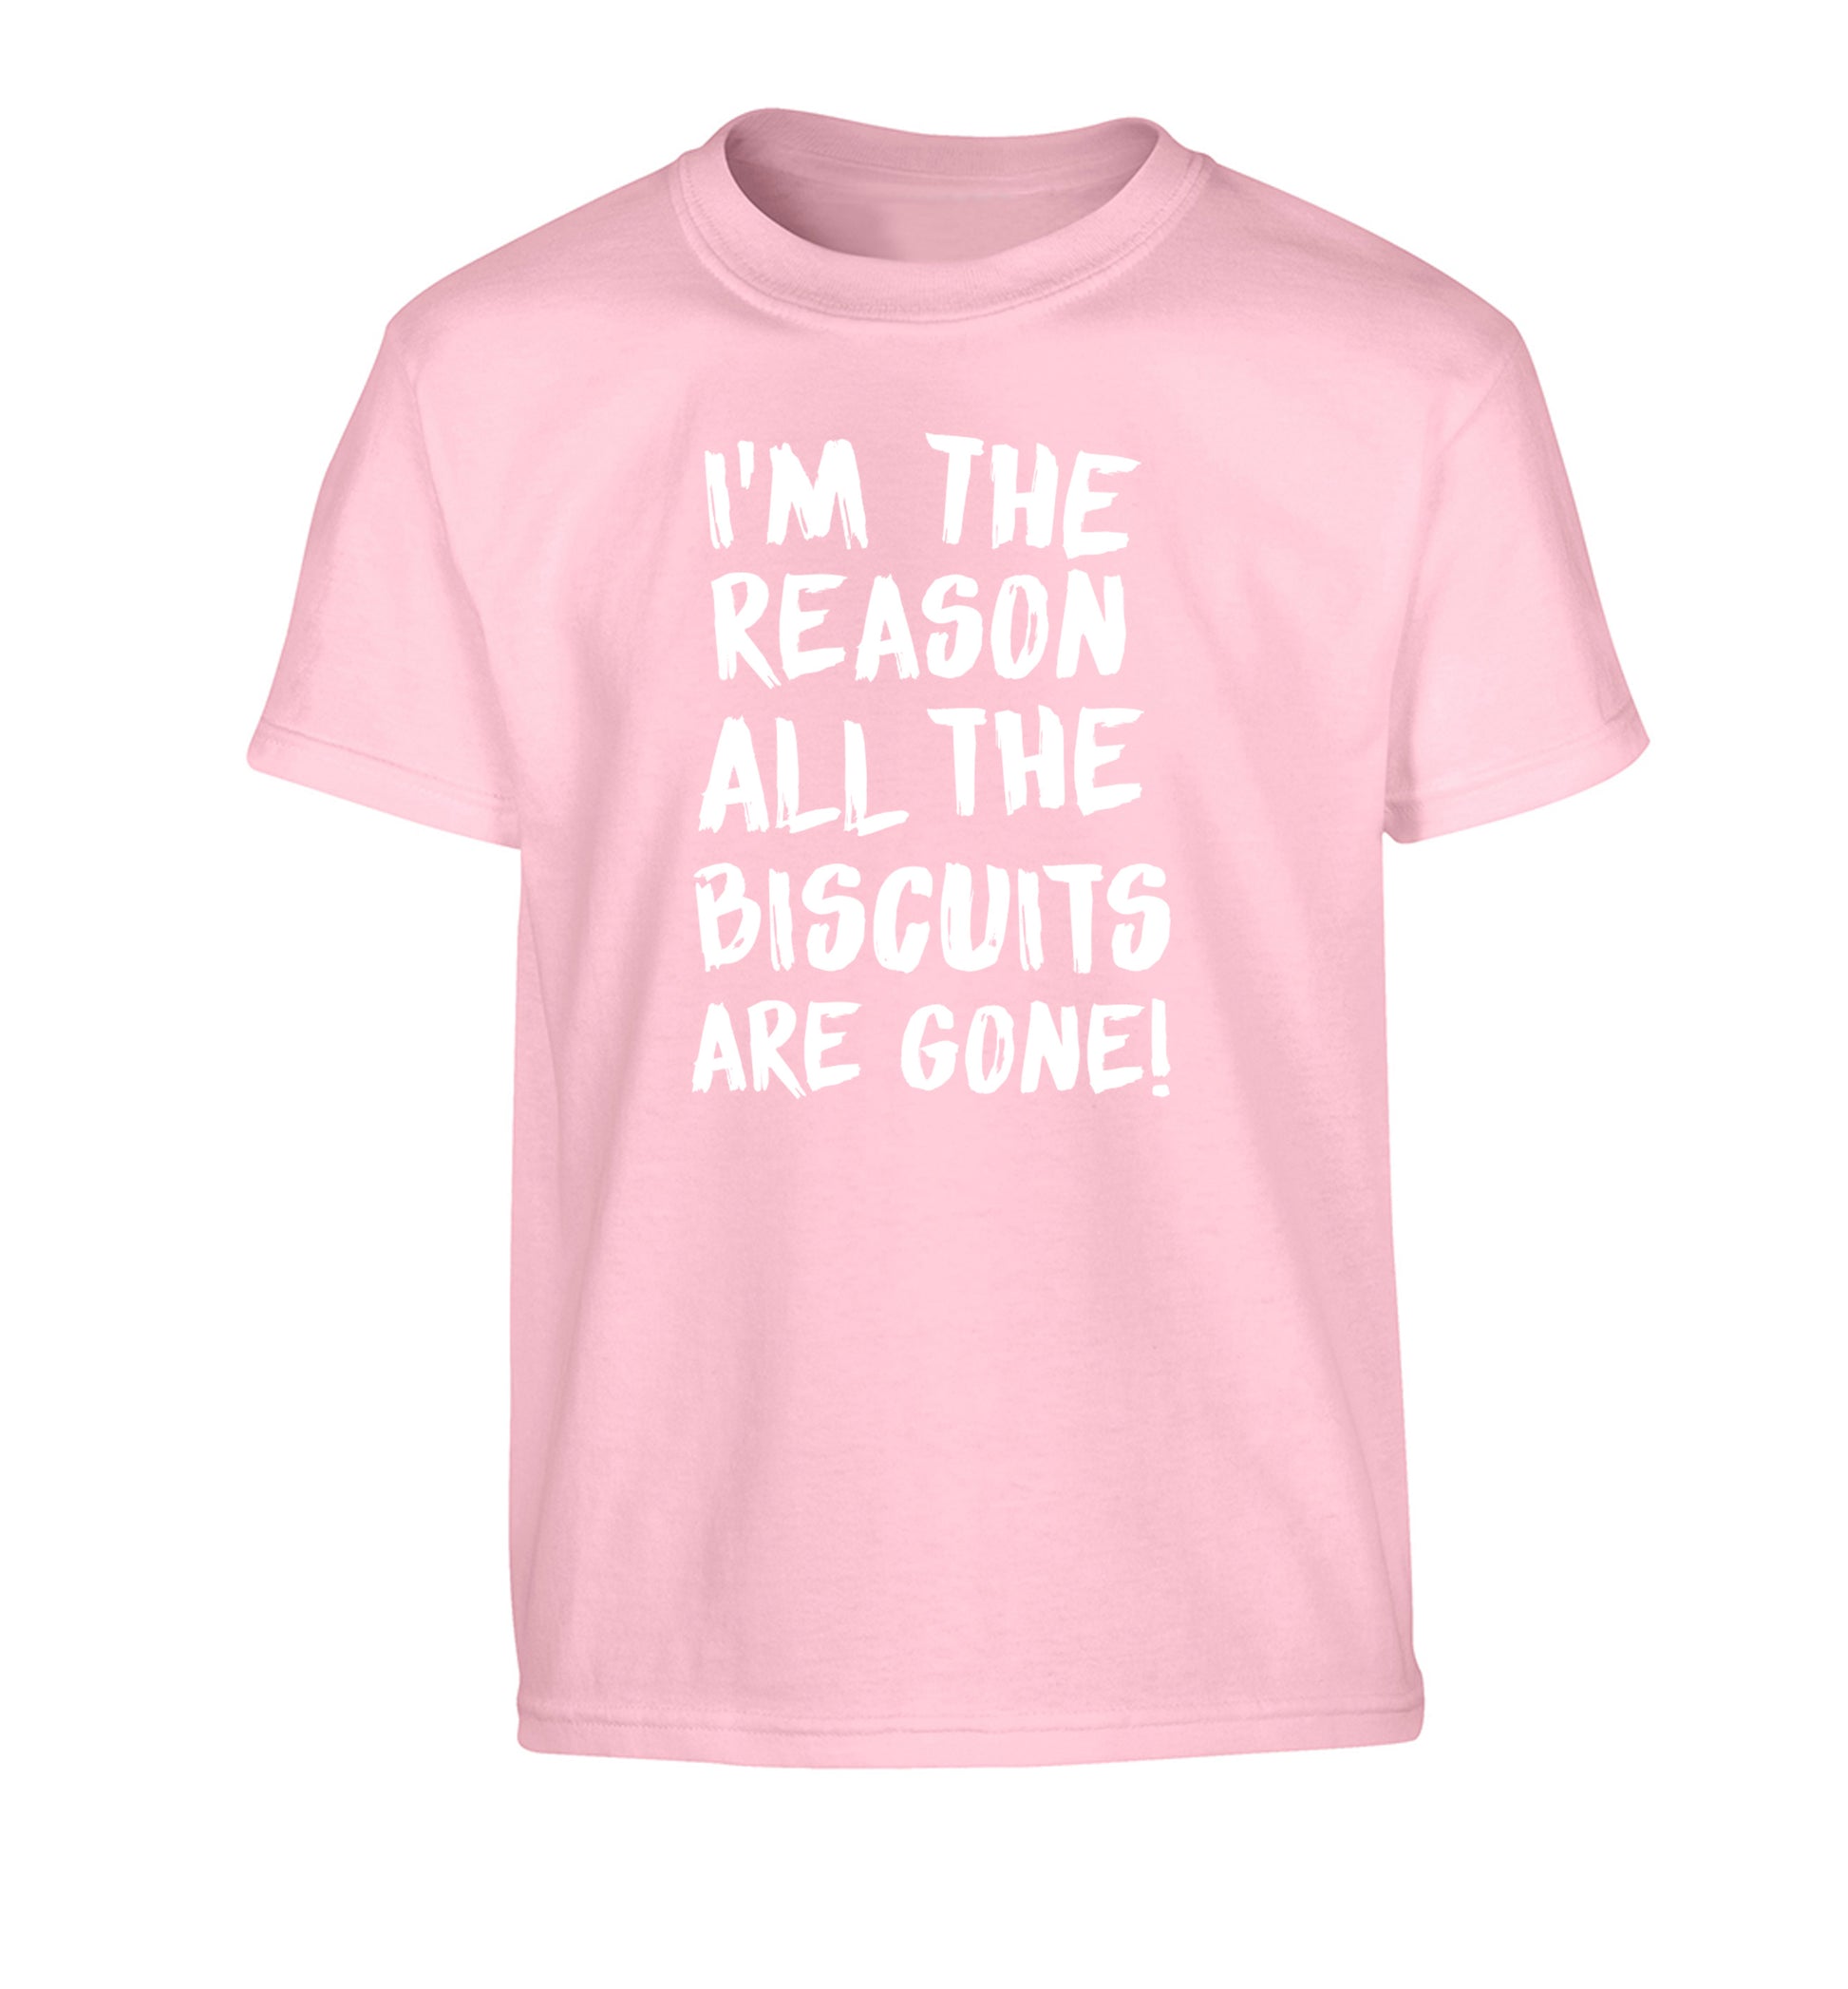 I'm the reason why all the biscuits are gone Children's light pink Tshirt 12-13 Years